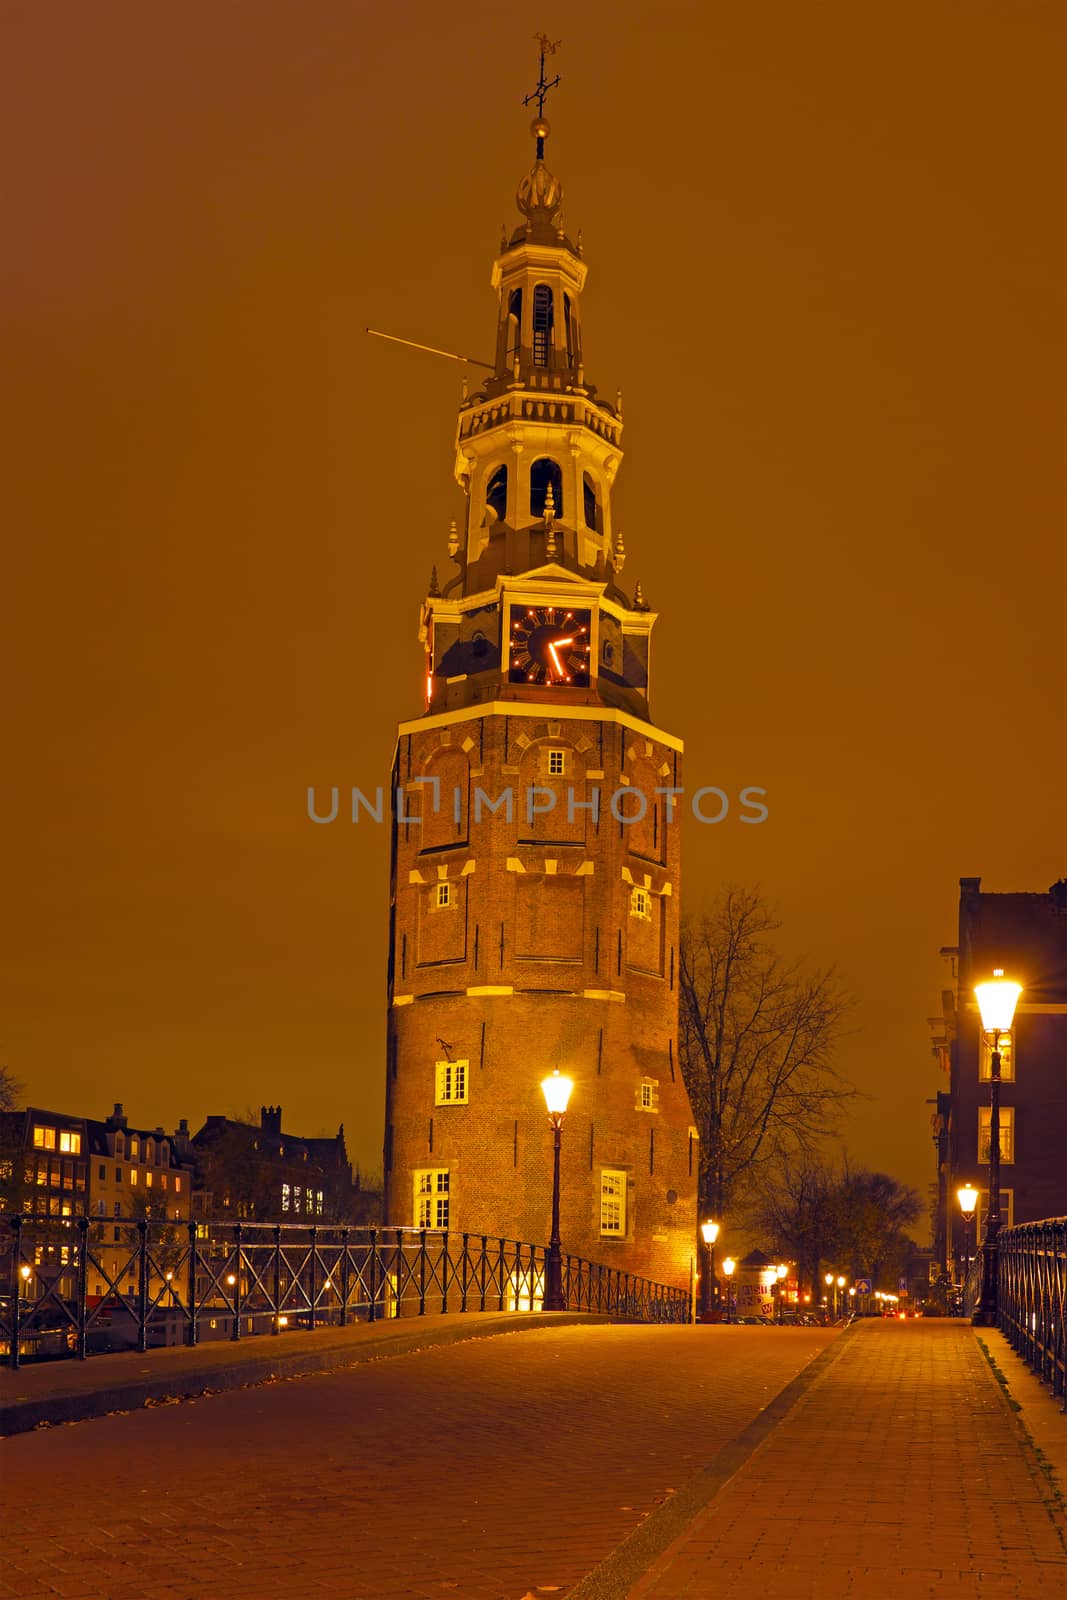 Water tower in Amsterdam in the Netherlands at night